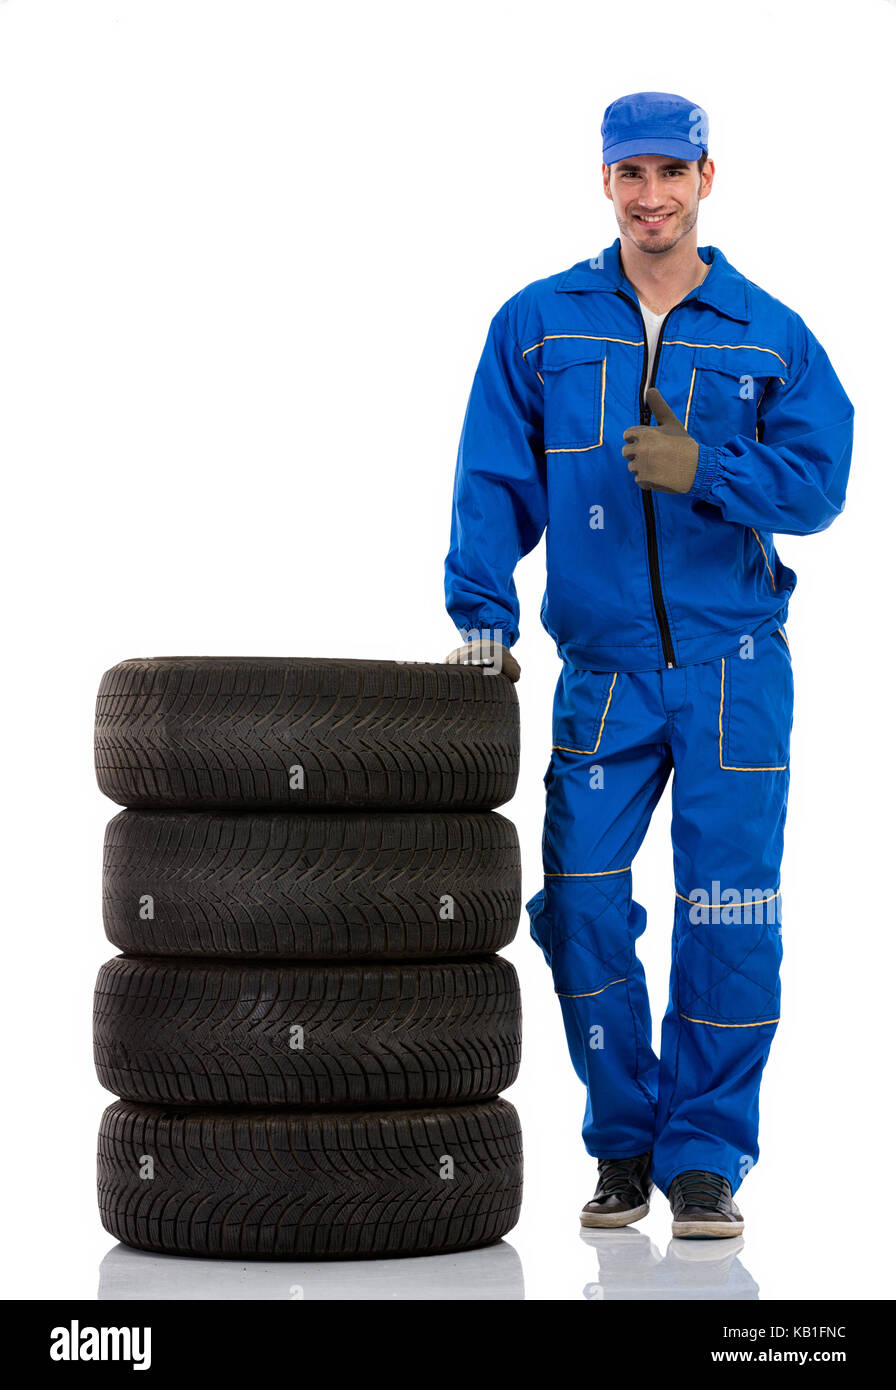 young car mechanic with pile car tires showing thumbs up Stock Photo